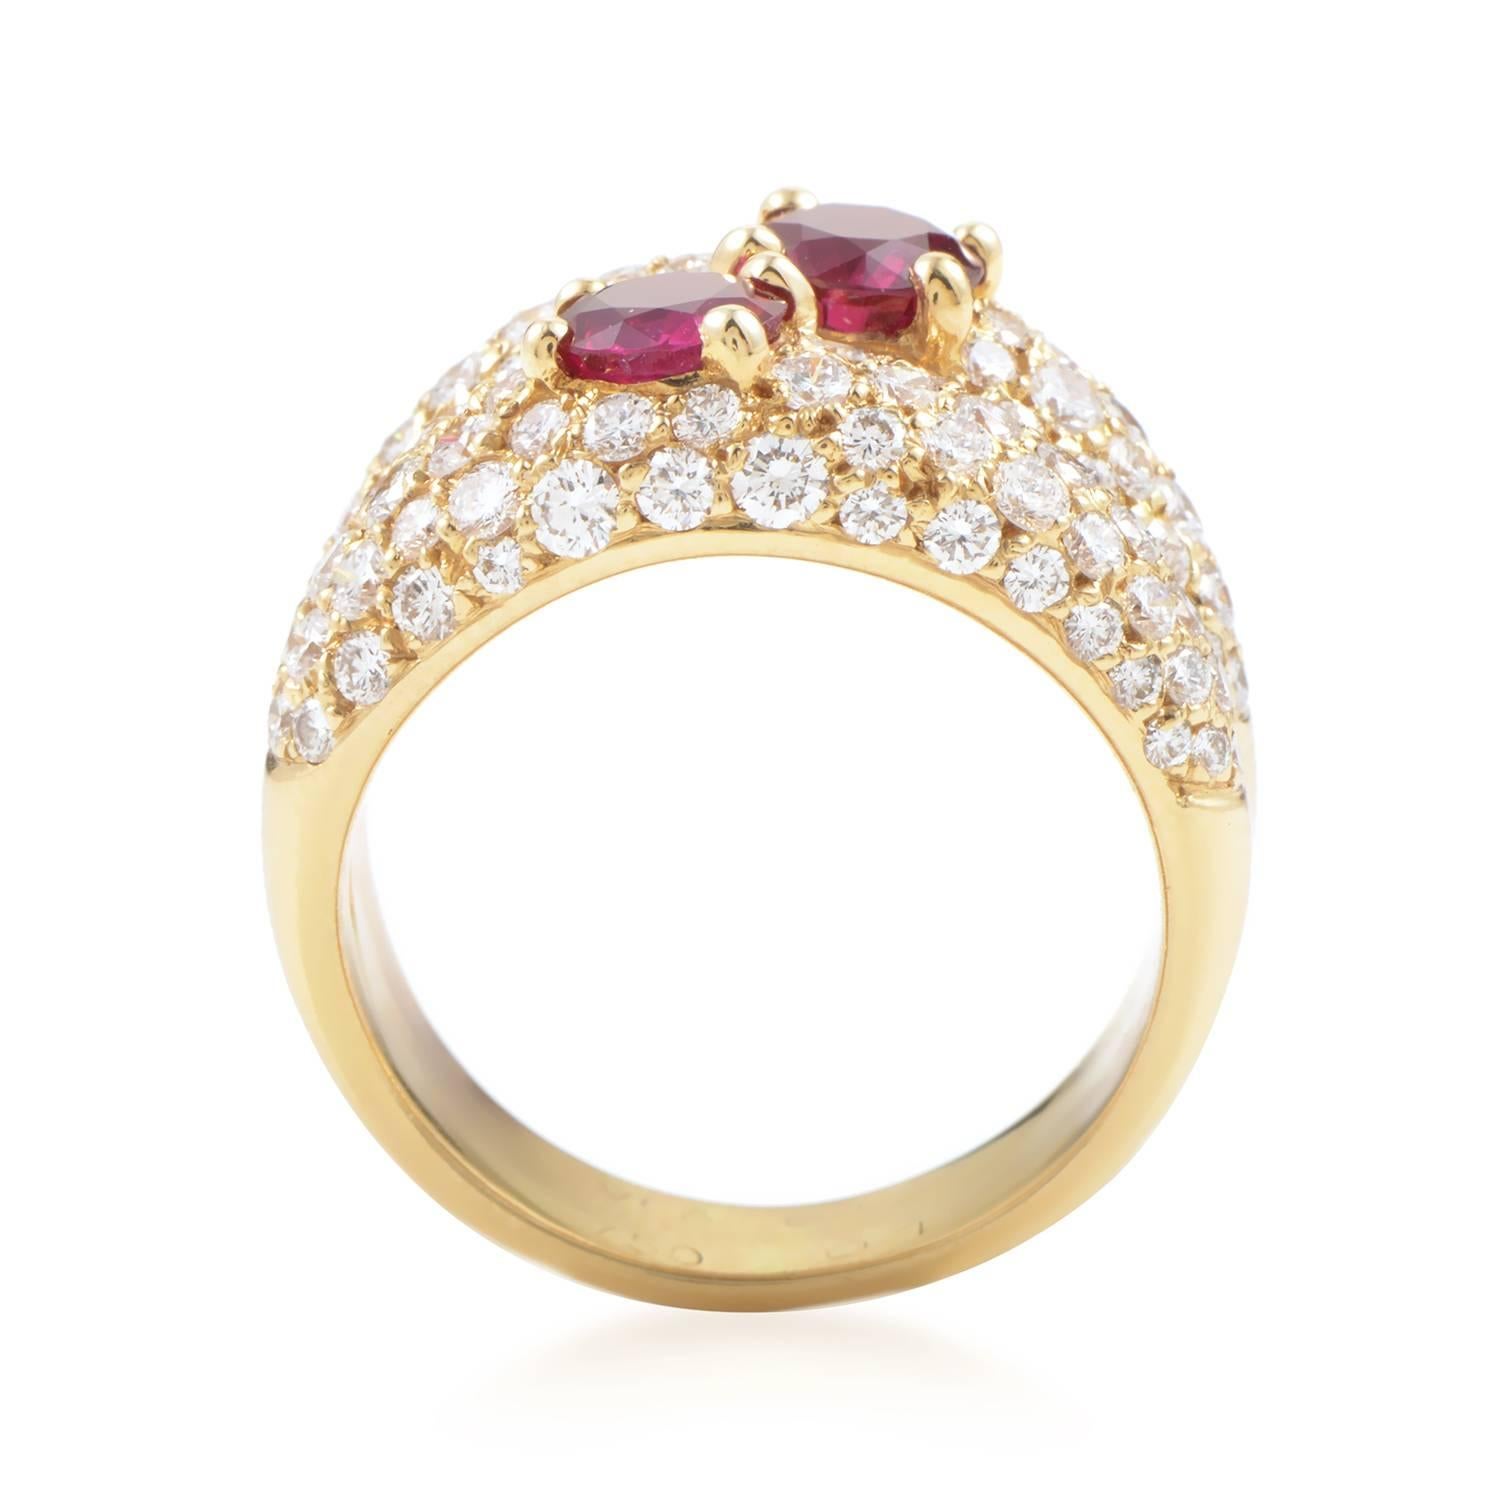 Feast your eyes upon the ultra-luxe design of this ring from Van Cleef & Arpels. The ring is made of two 18K yellow gold bands forged together, and paved with 1.59ct of diamonds. Lastly, 1.80ct of rubies add a splash of colorful brilliance to